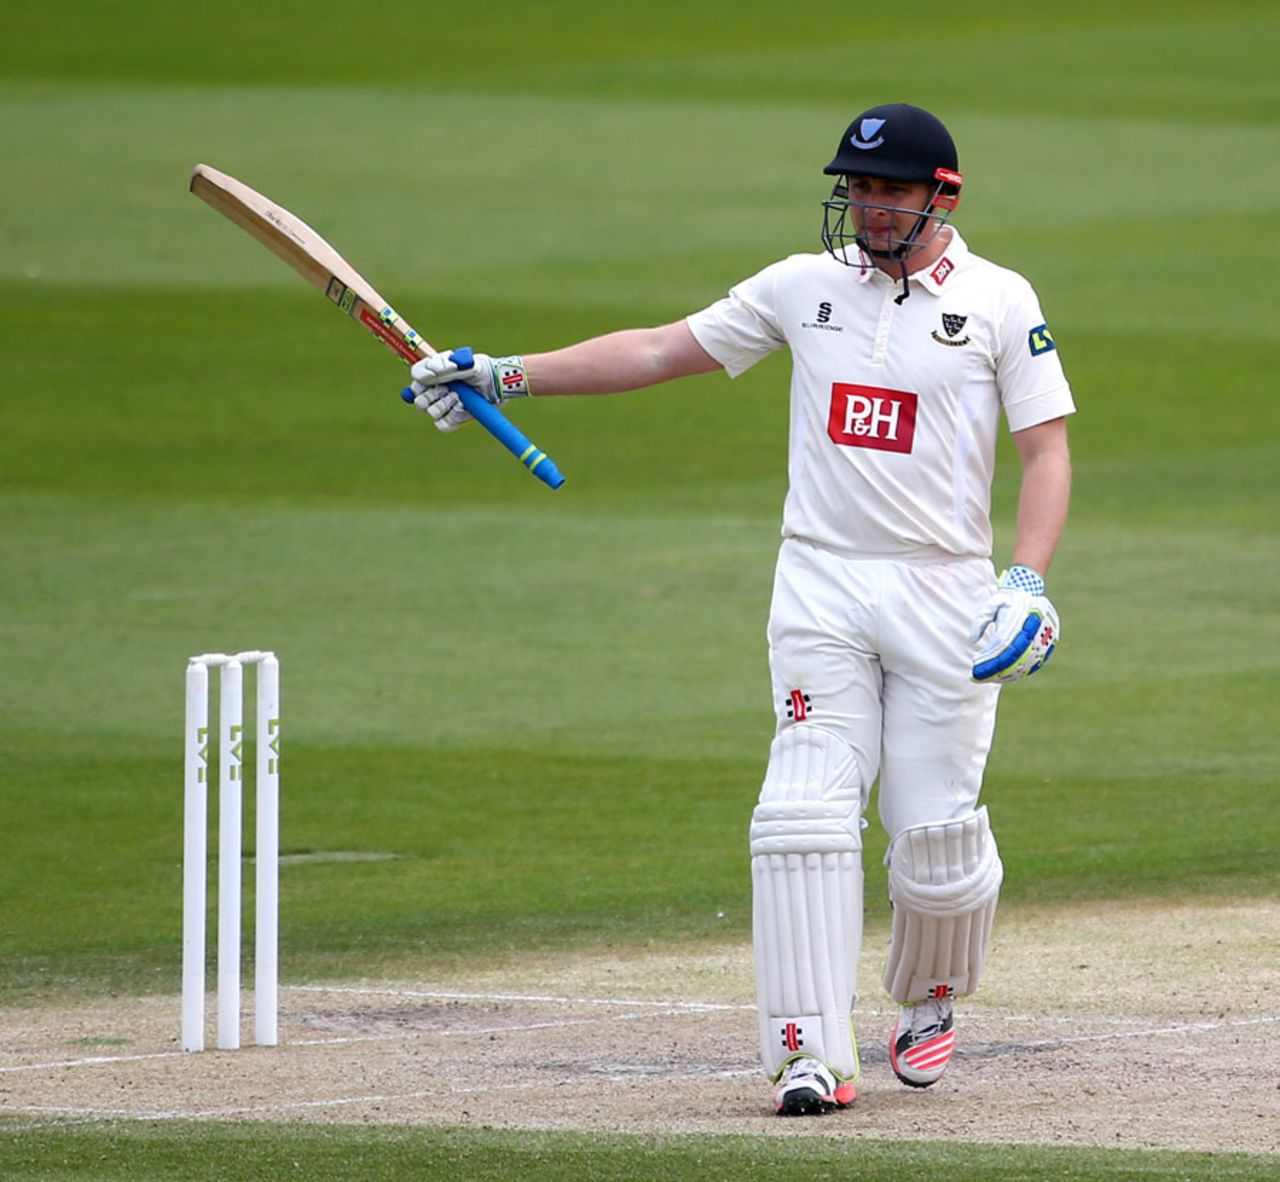 Luke Wright went on to make 84, Sussex v Hampshire, County Championship, Division One, Hove, 3rd day, June 9, 2015